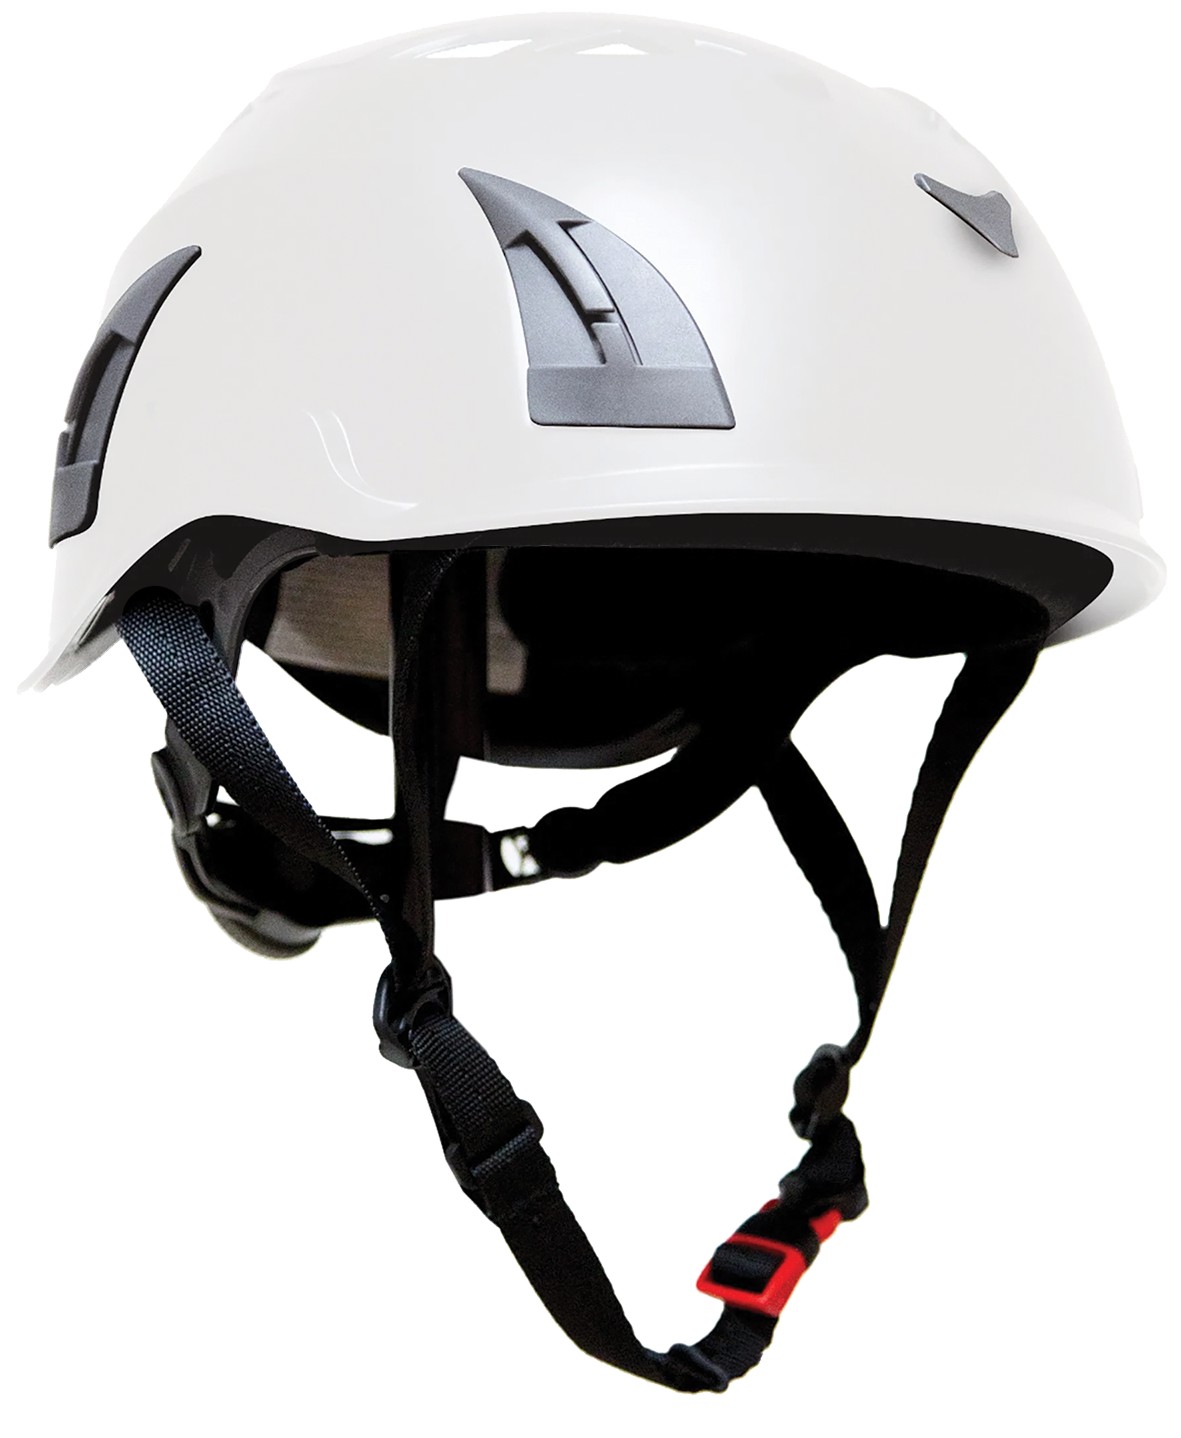 Armour Safety Products Pty Ltd. - Armour Ground Industrial Helmet – EN397